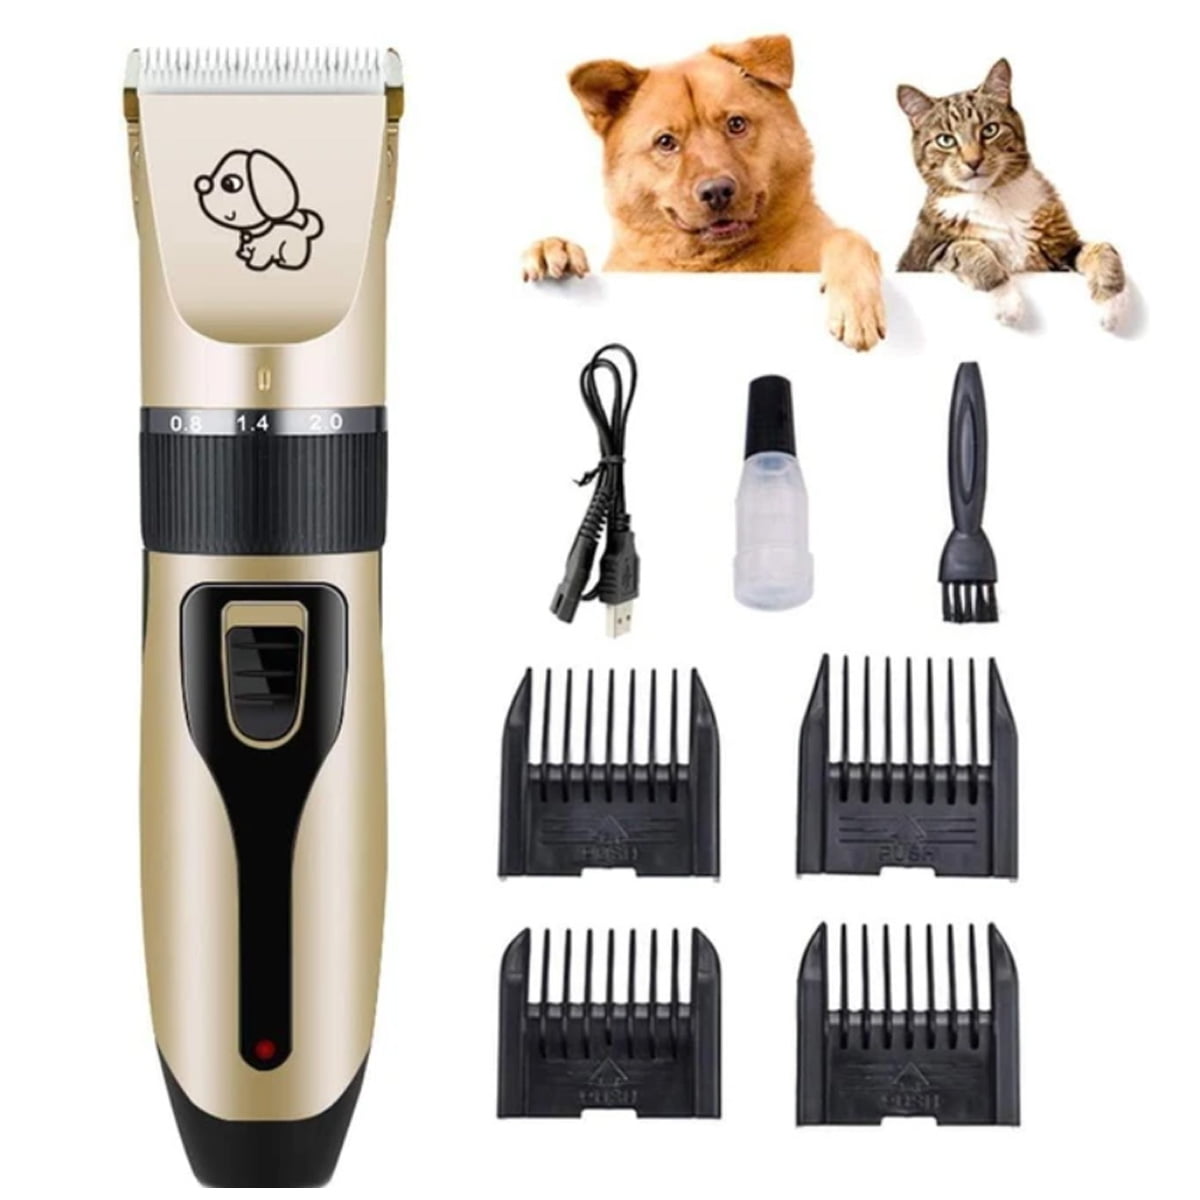 Heavy Duty 2-Speed Pet Hair Grooming Clippers Kit Professional Rechargeable Cordless Quiet Dog Shaver for Small and Large Dogs Cats and Other Pets CAHTUOO Dog Grooming Clippers 